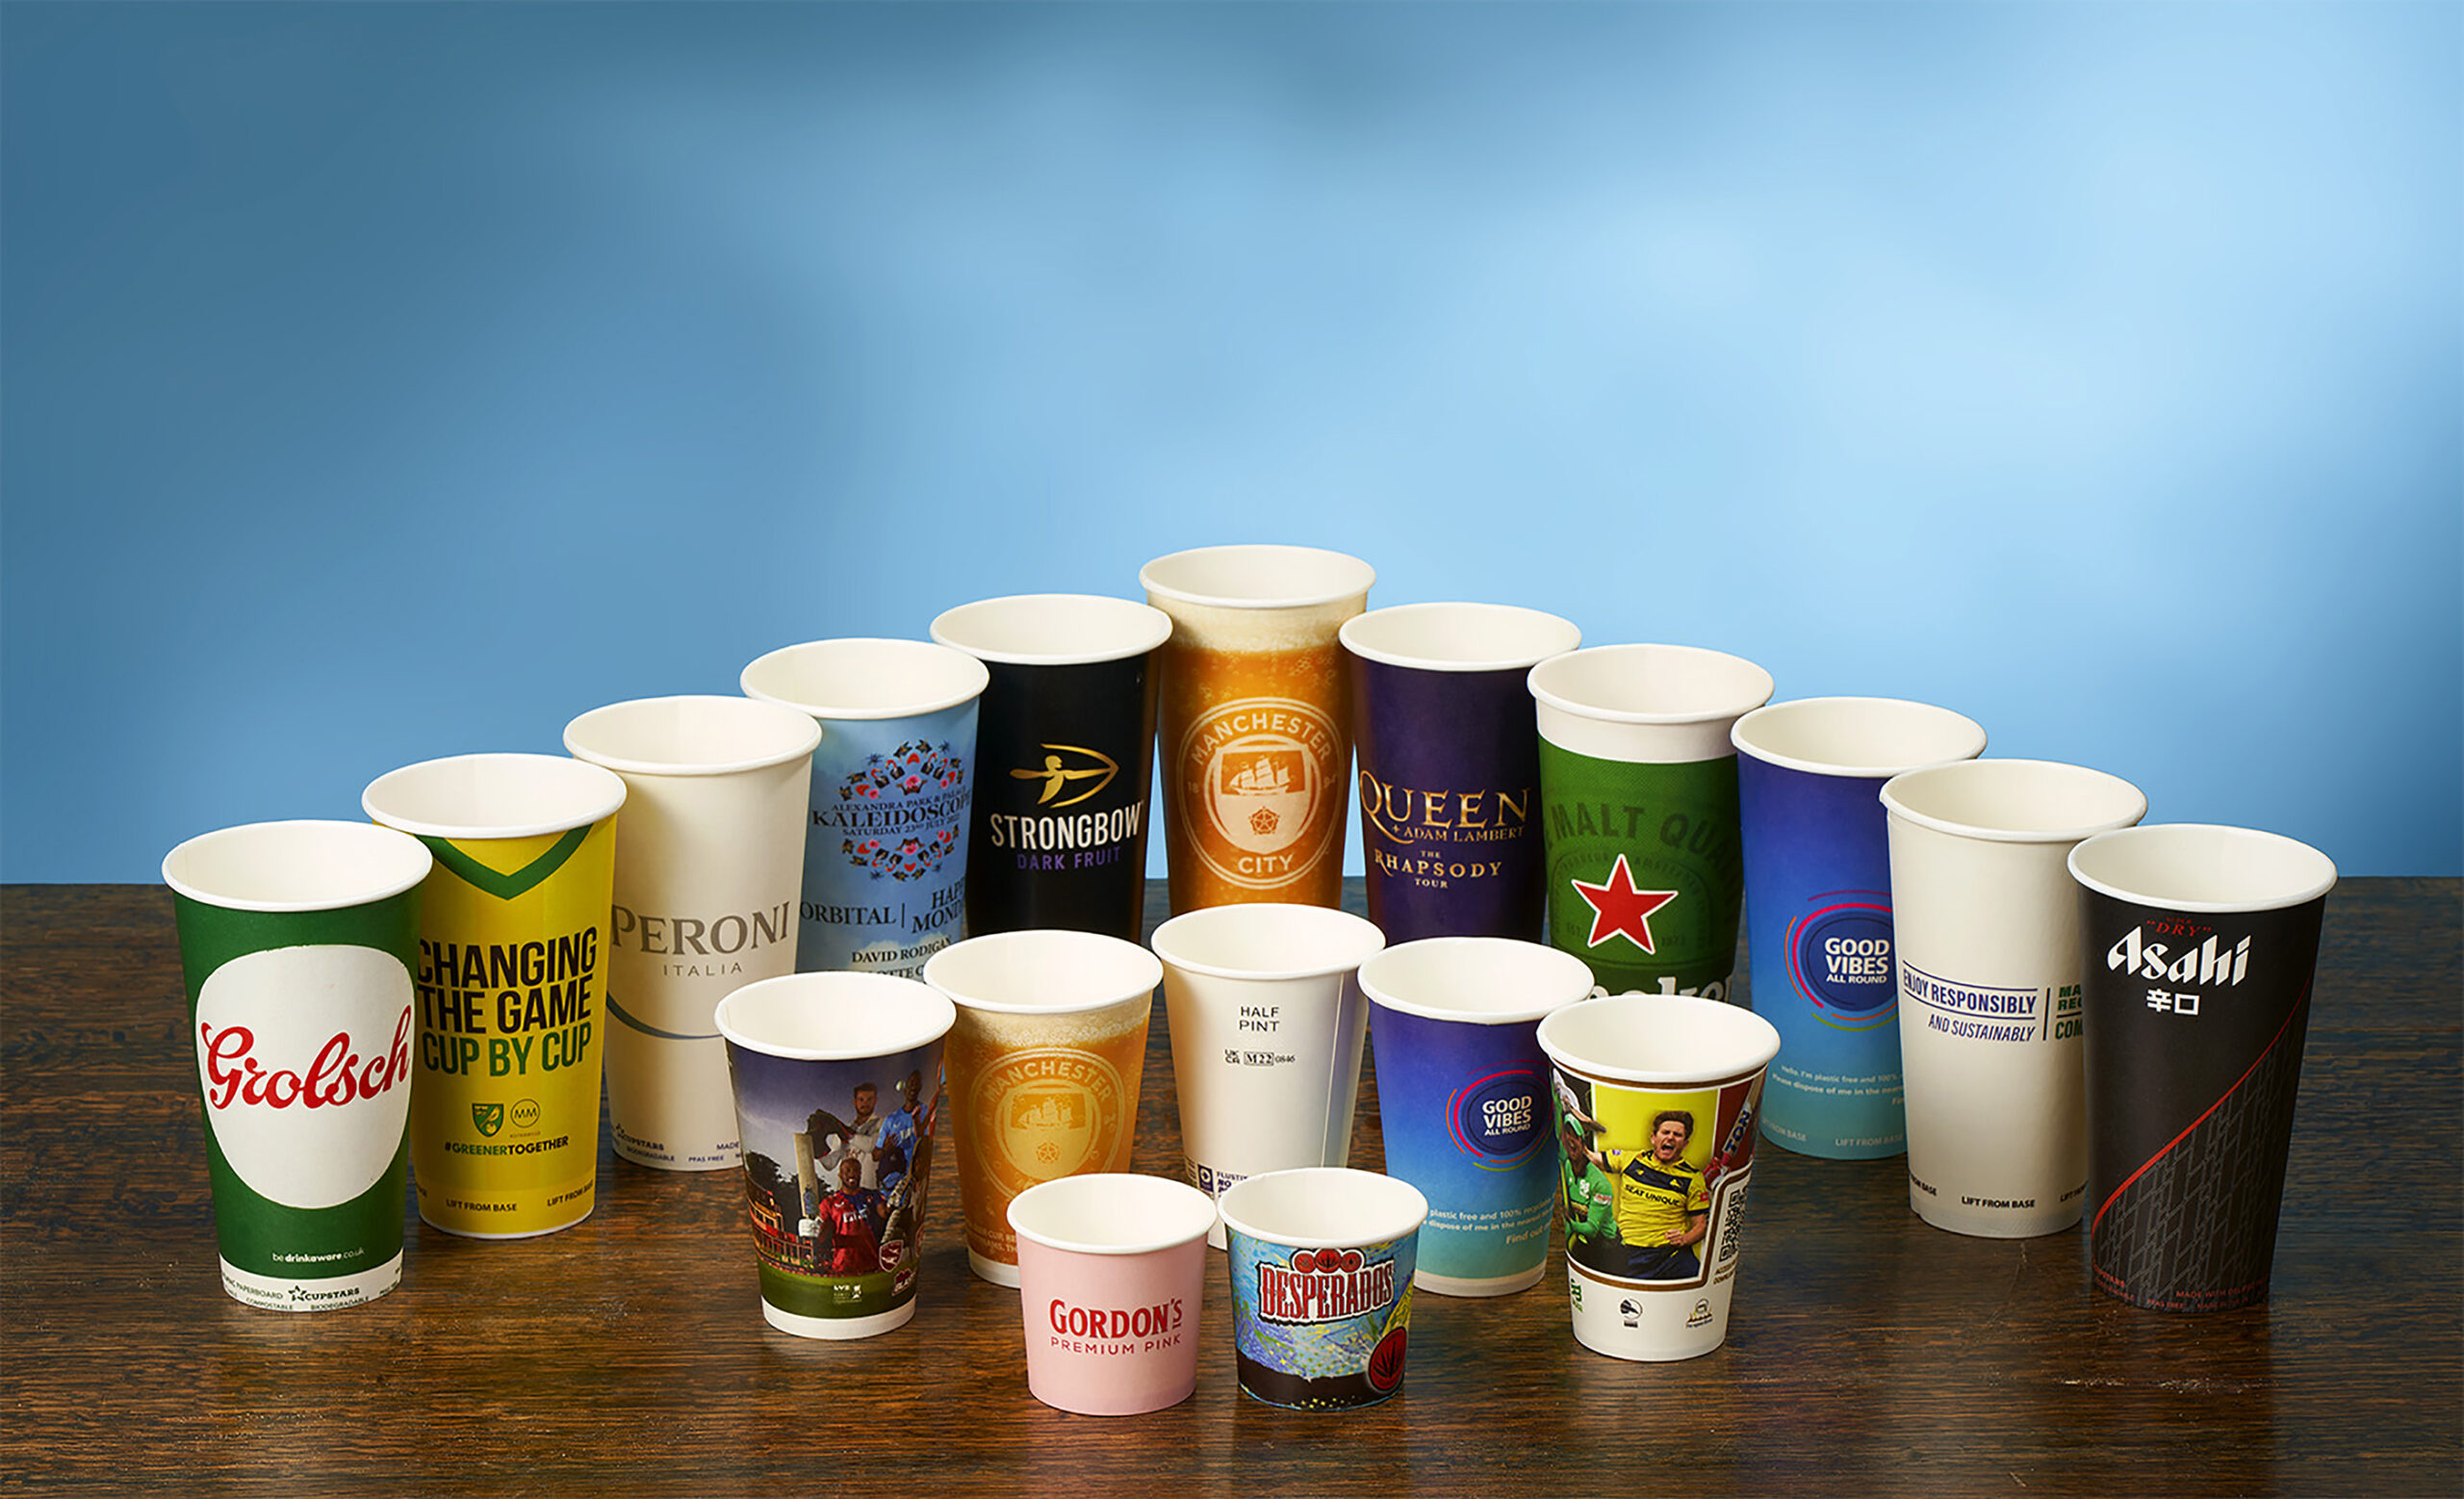 New paper cups from Seal Packaging are available for concerts and other live events